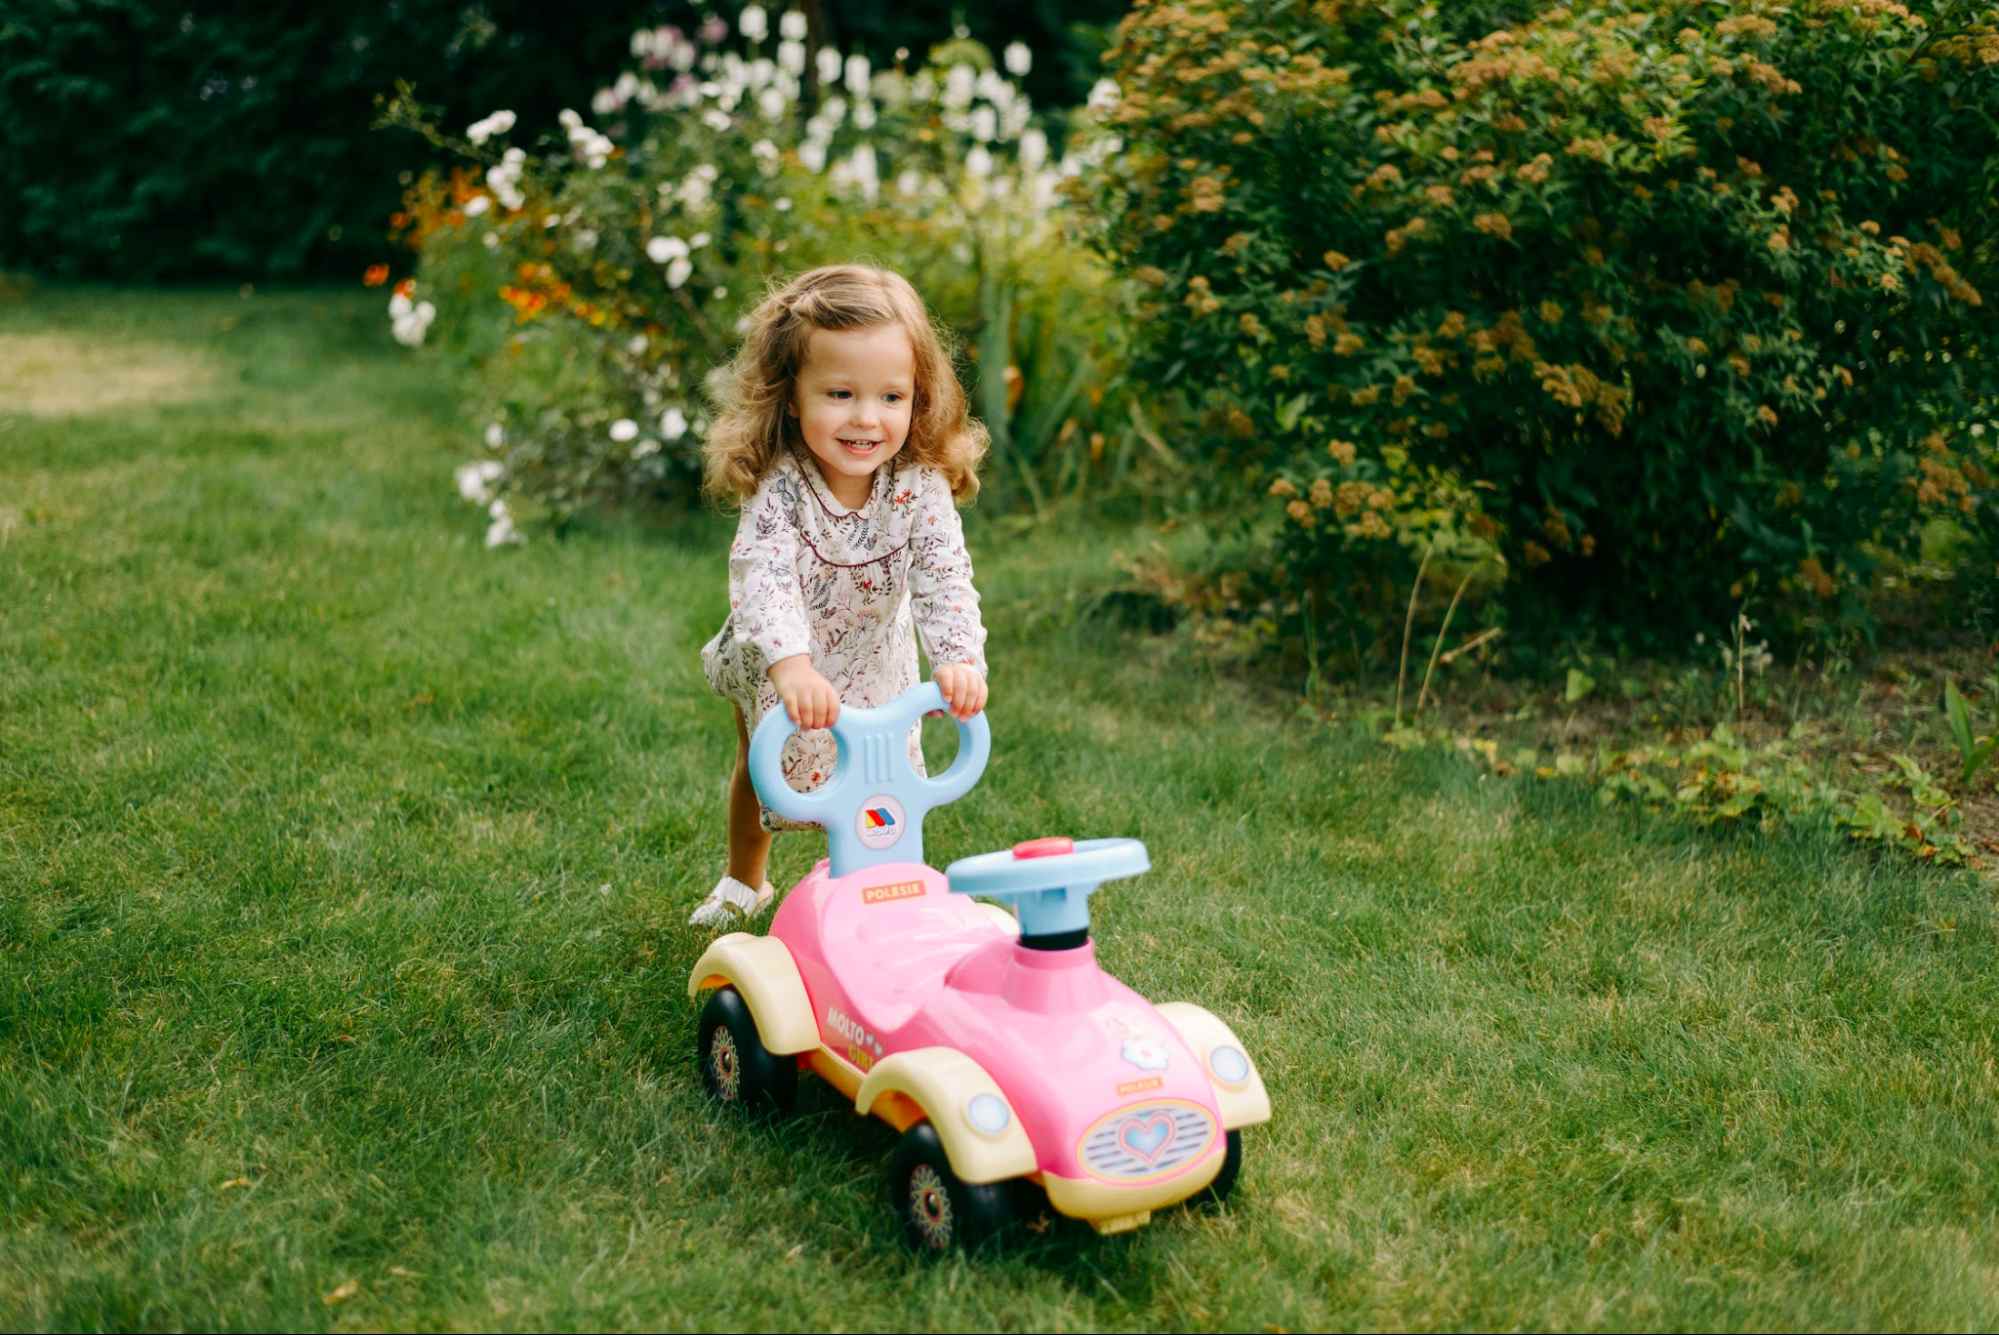 This is an image of a child pushing a toy car on the grass.